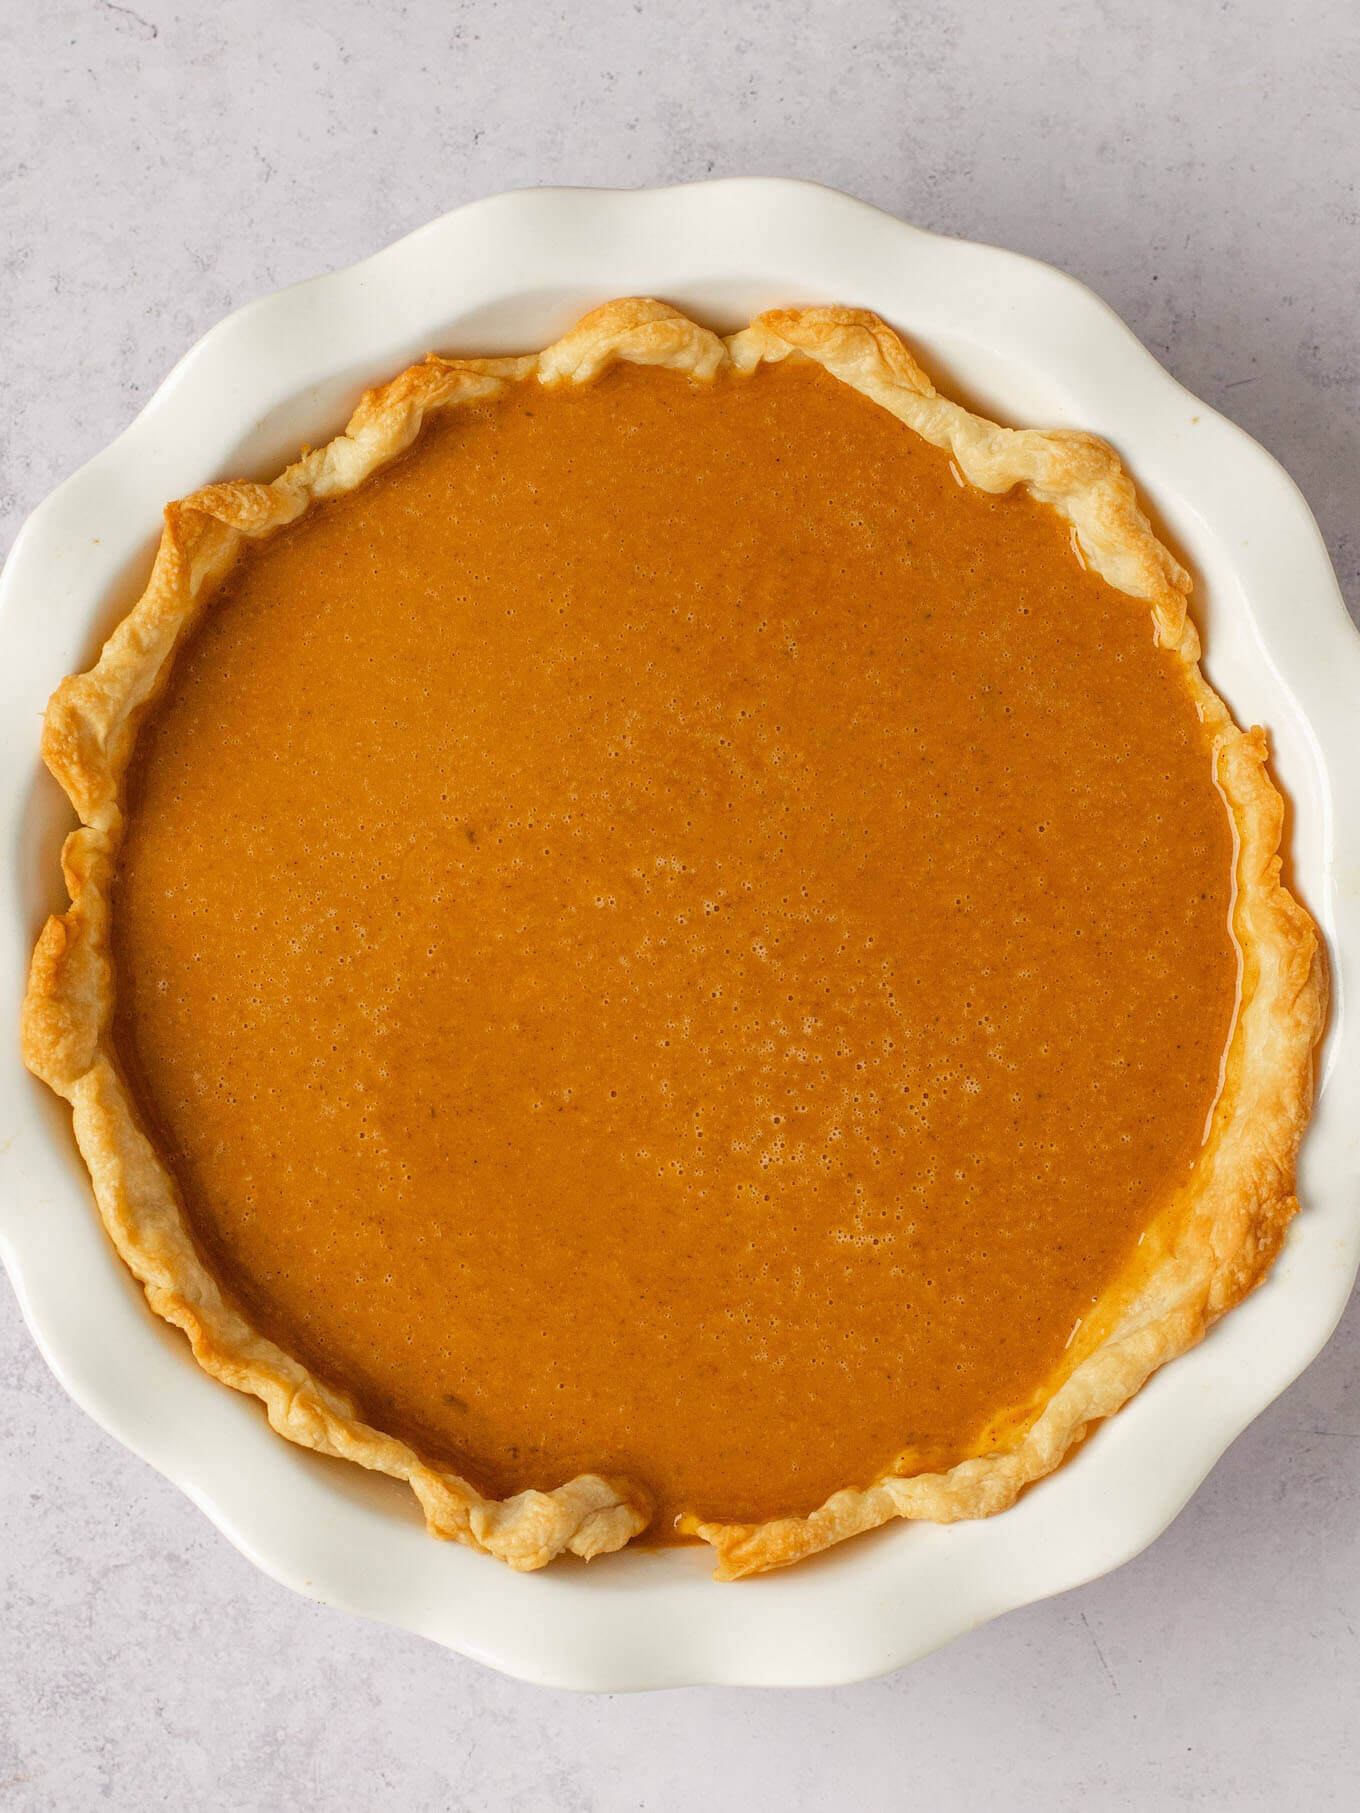 An overhead view of a partially baked pie crust filled with the pumpkin pie filling.